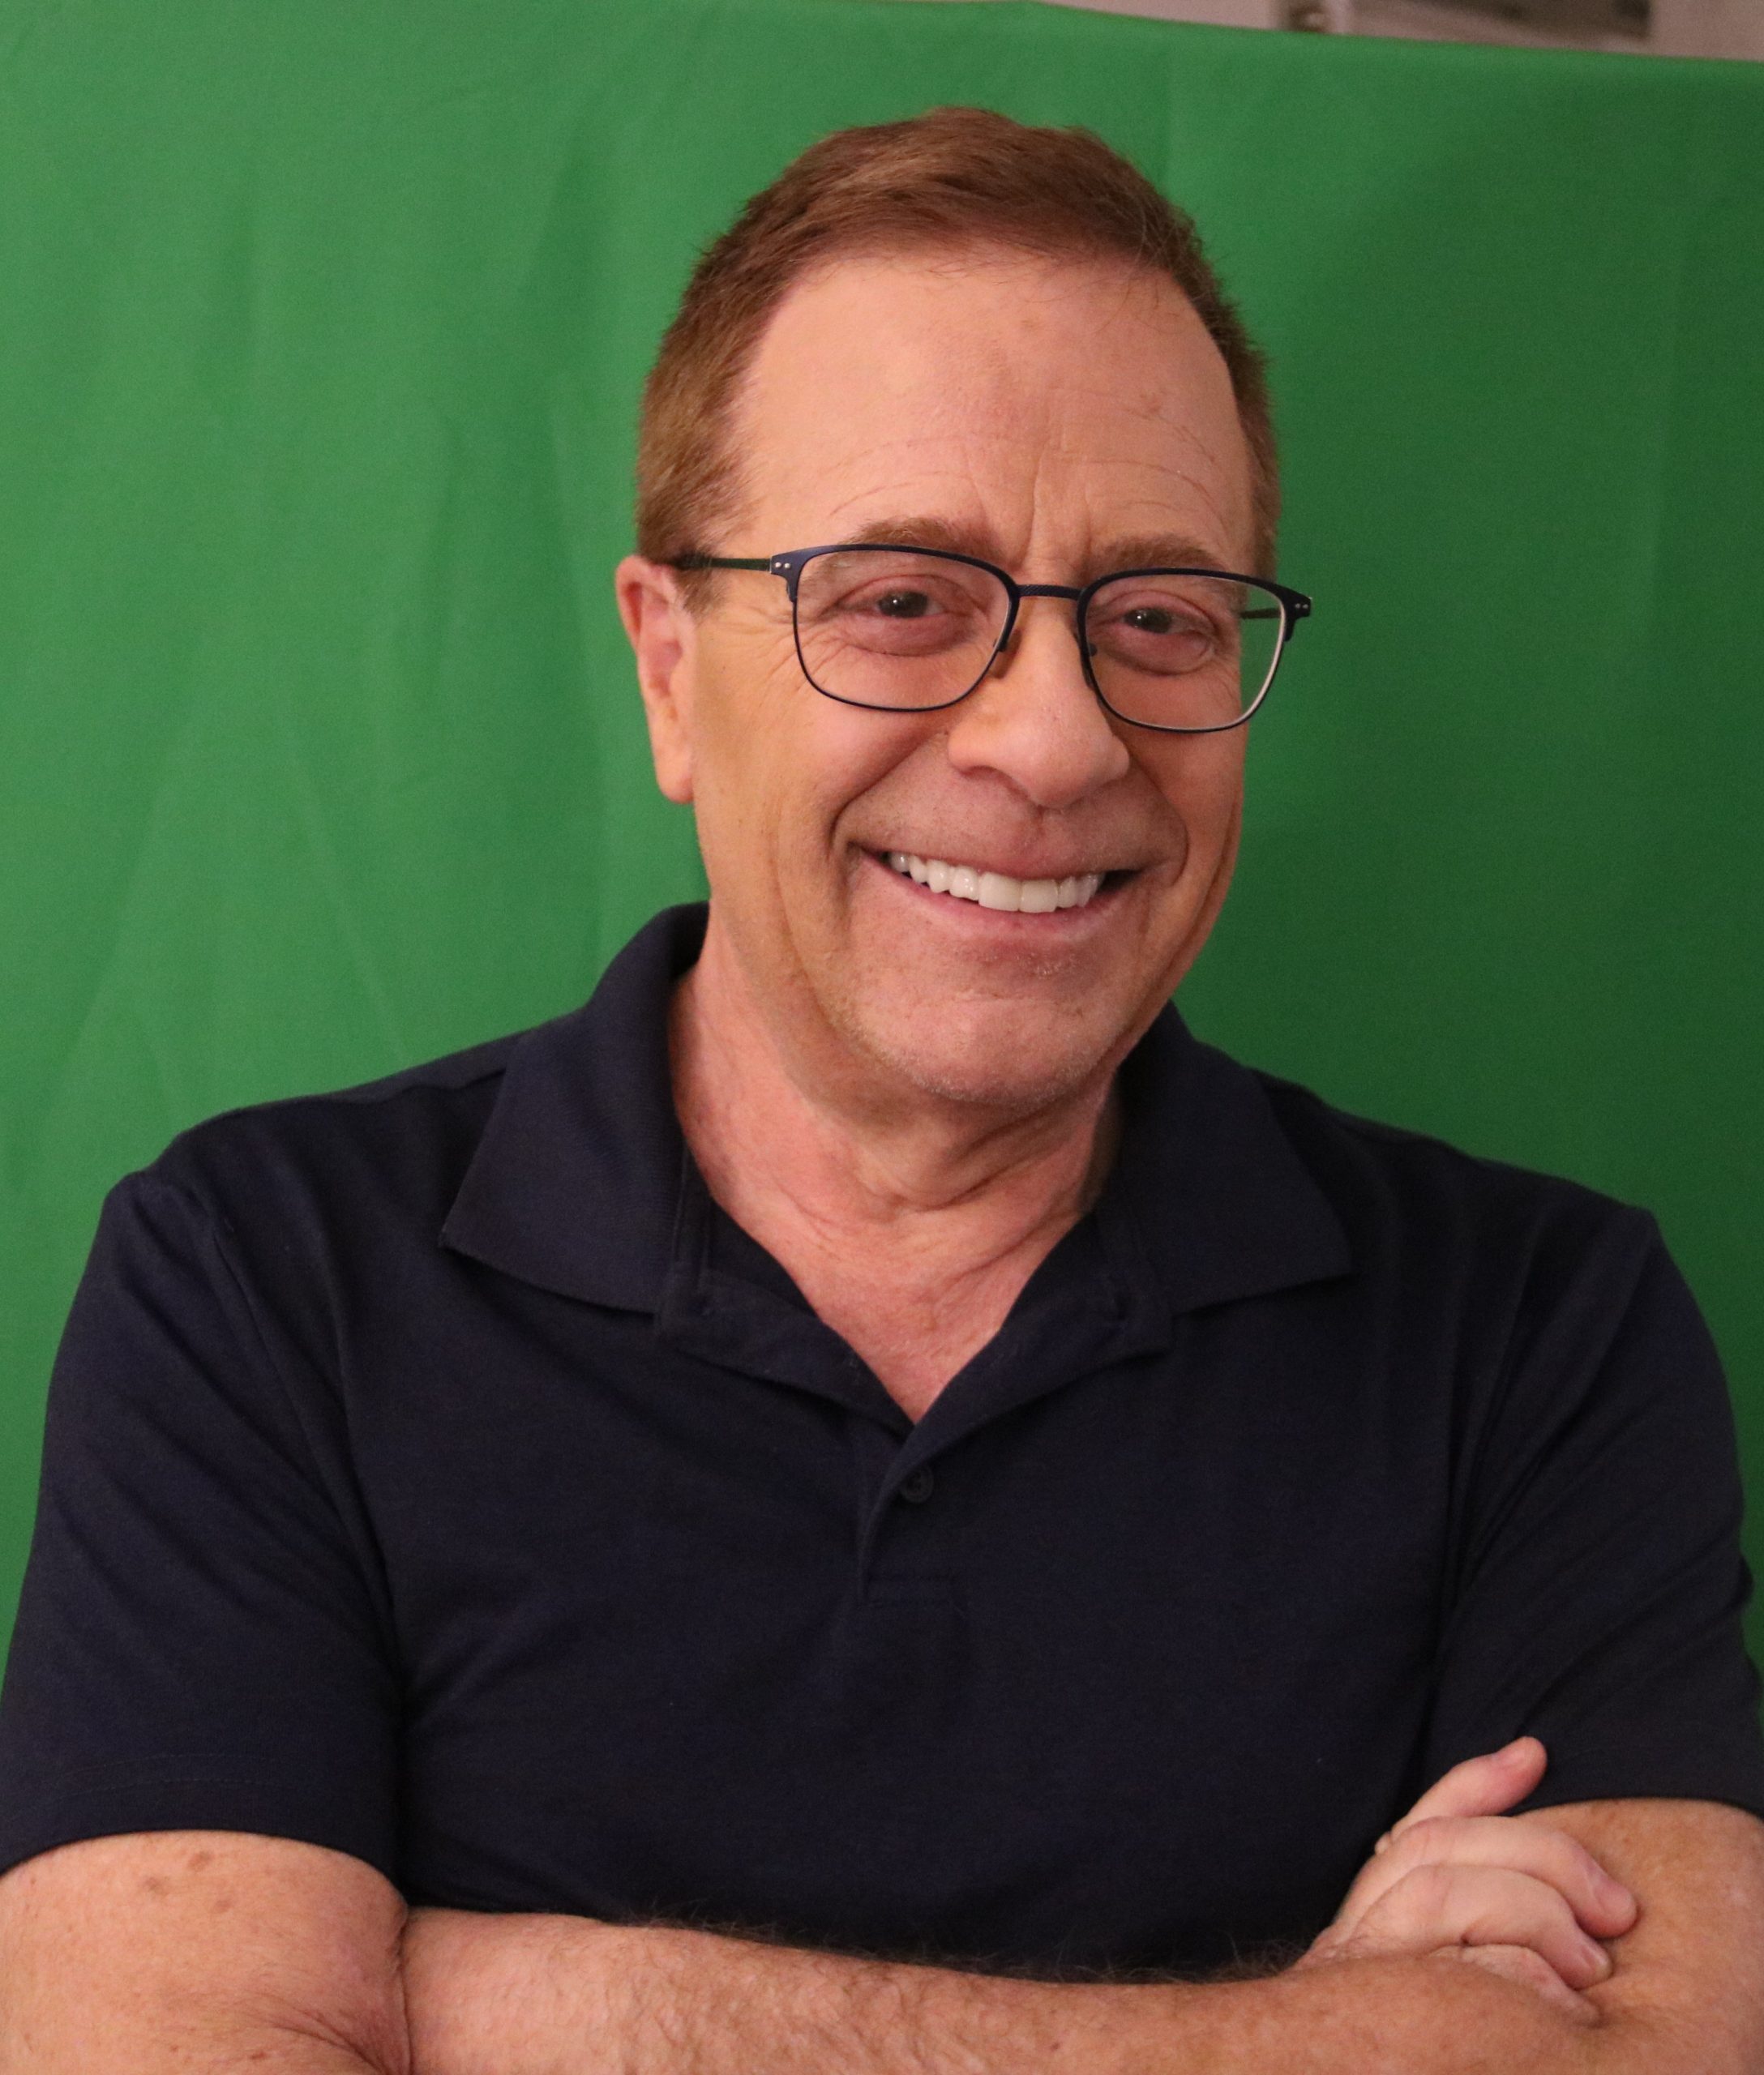 Todd Gross In Front Of Green Screen